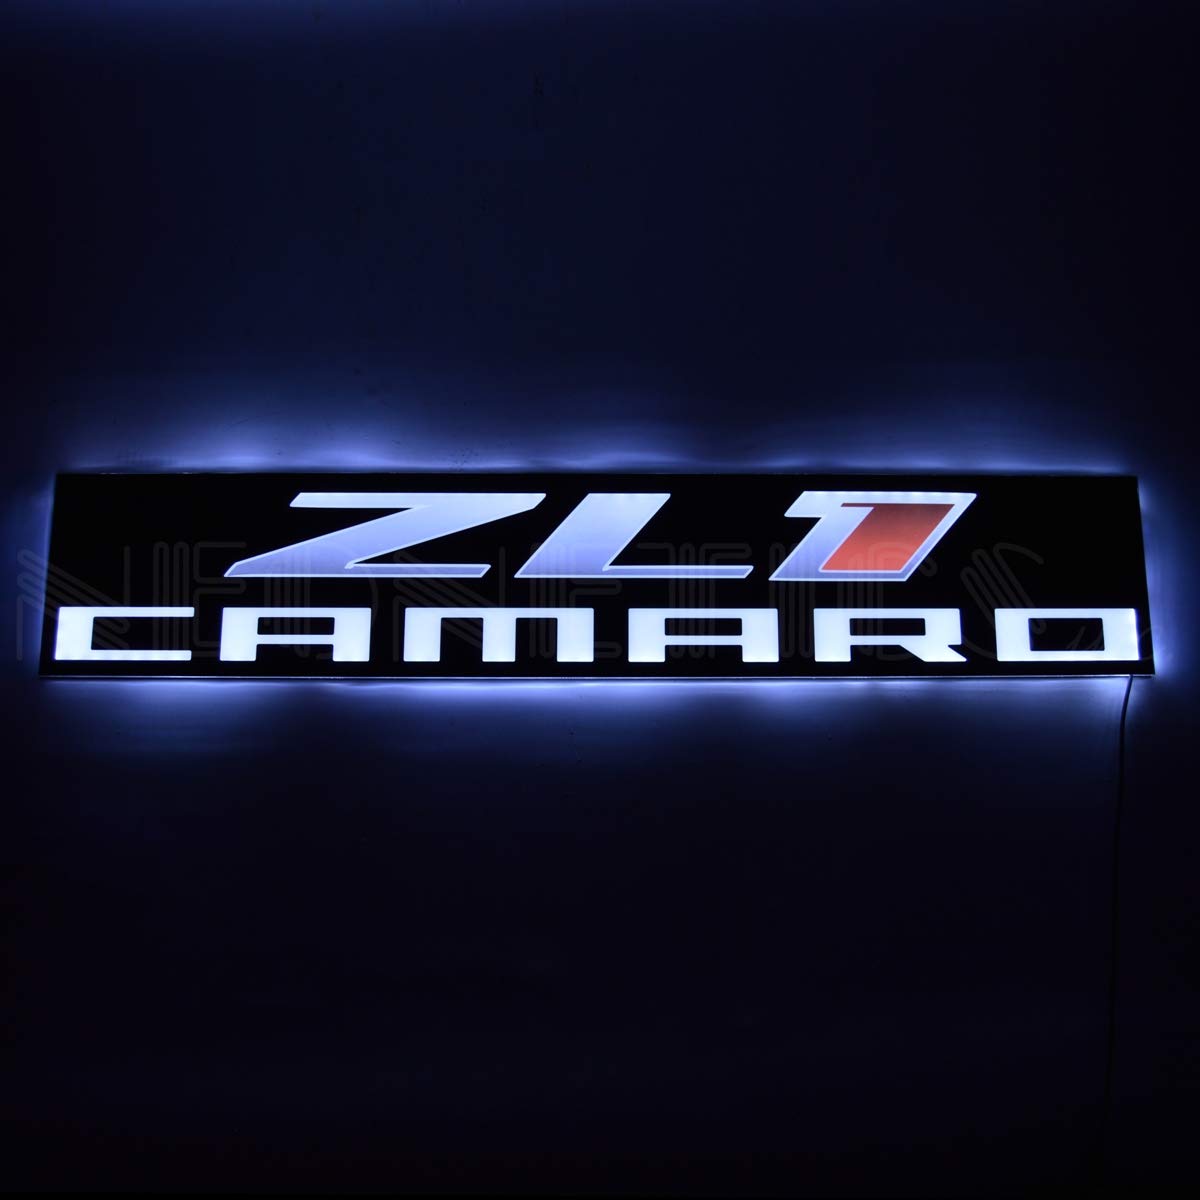 Chevy Camaro ZL1 Ultra Slim Led Wall Light Sign Red, Black and White Logo  with White LED Lights, Measures 36 inch by inch by 3/8 inch Thick  7LEDZL